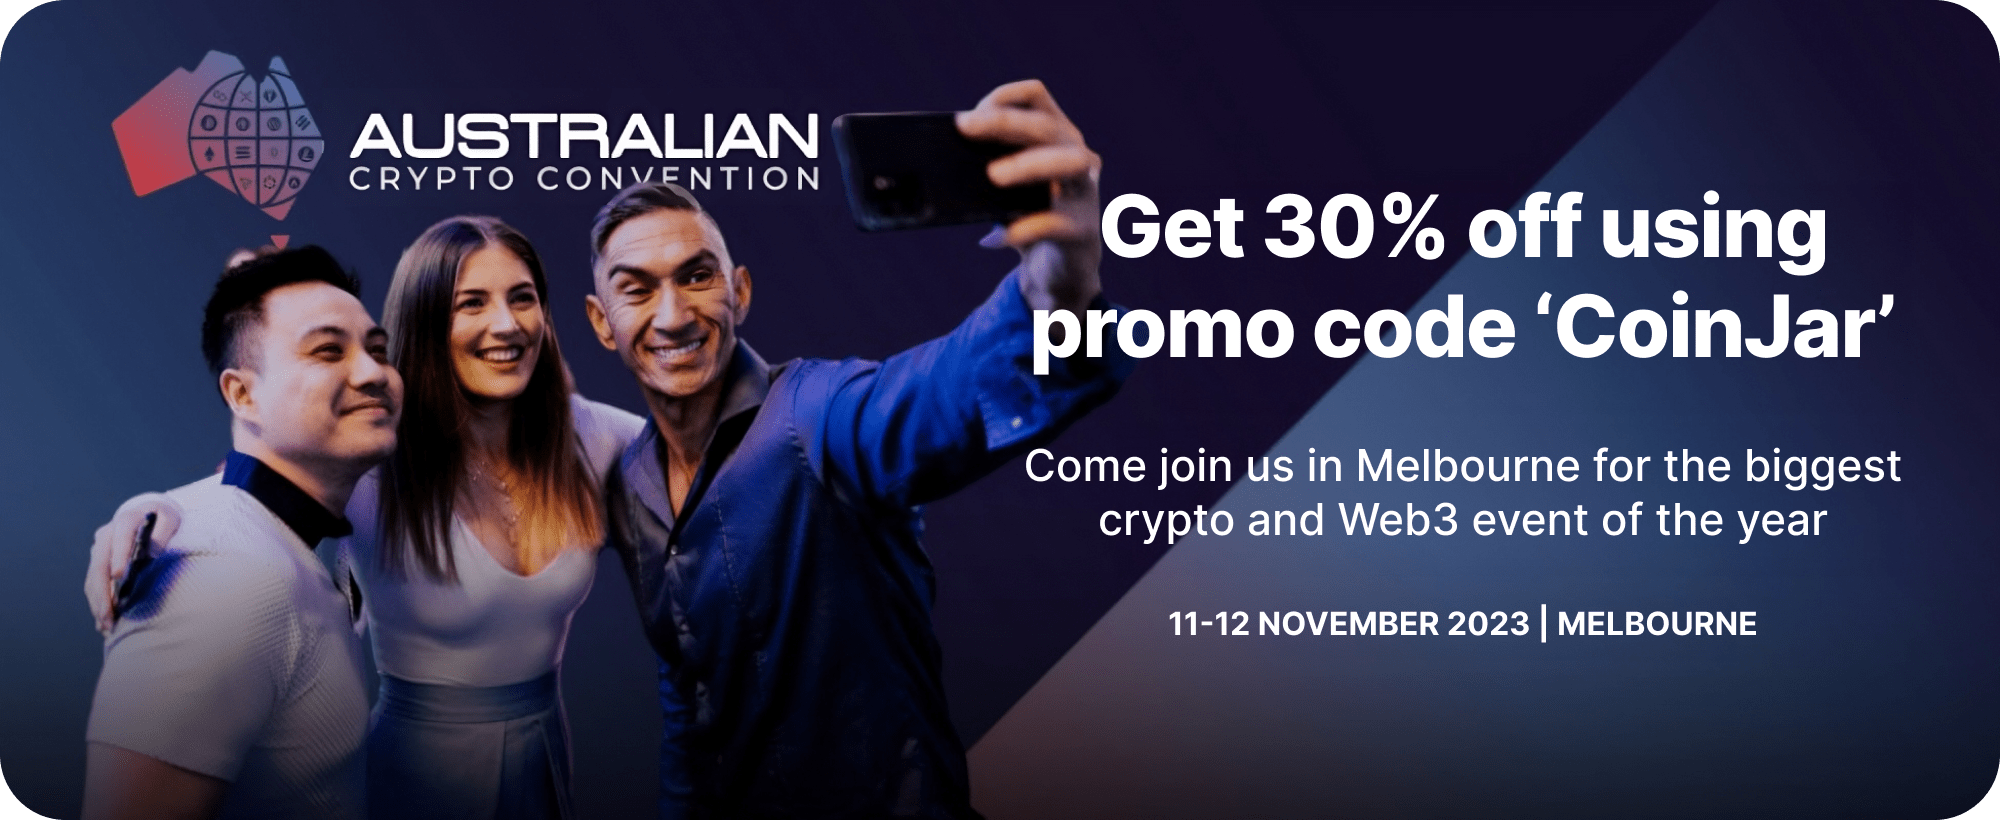 Join us at the Australian Crypto Convention in Melbourne